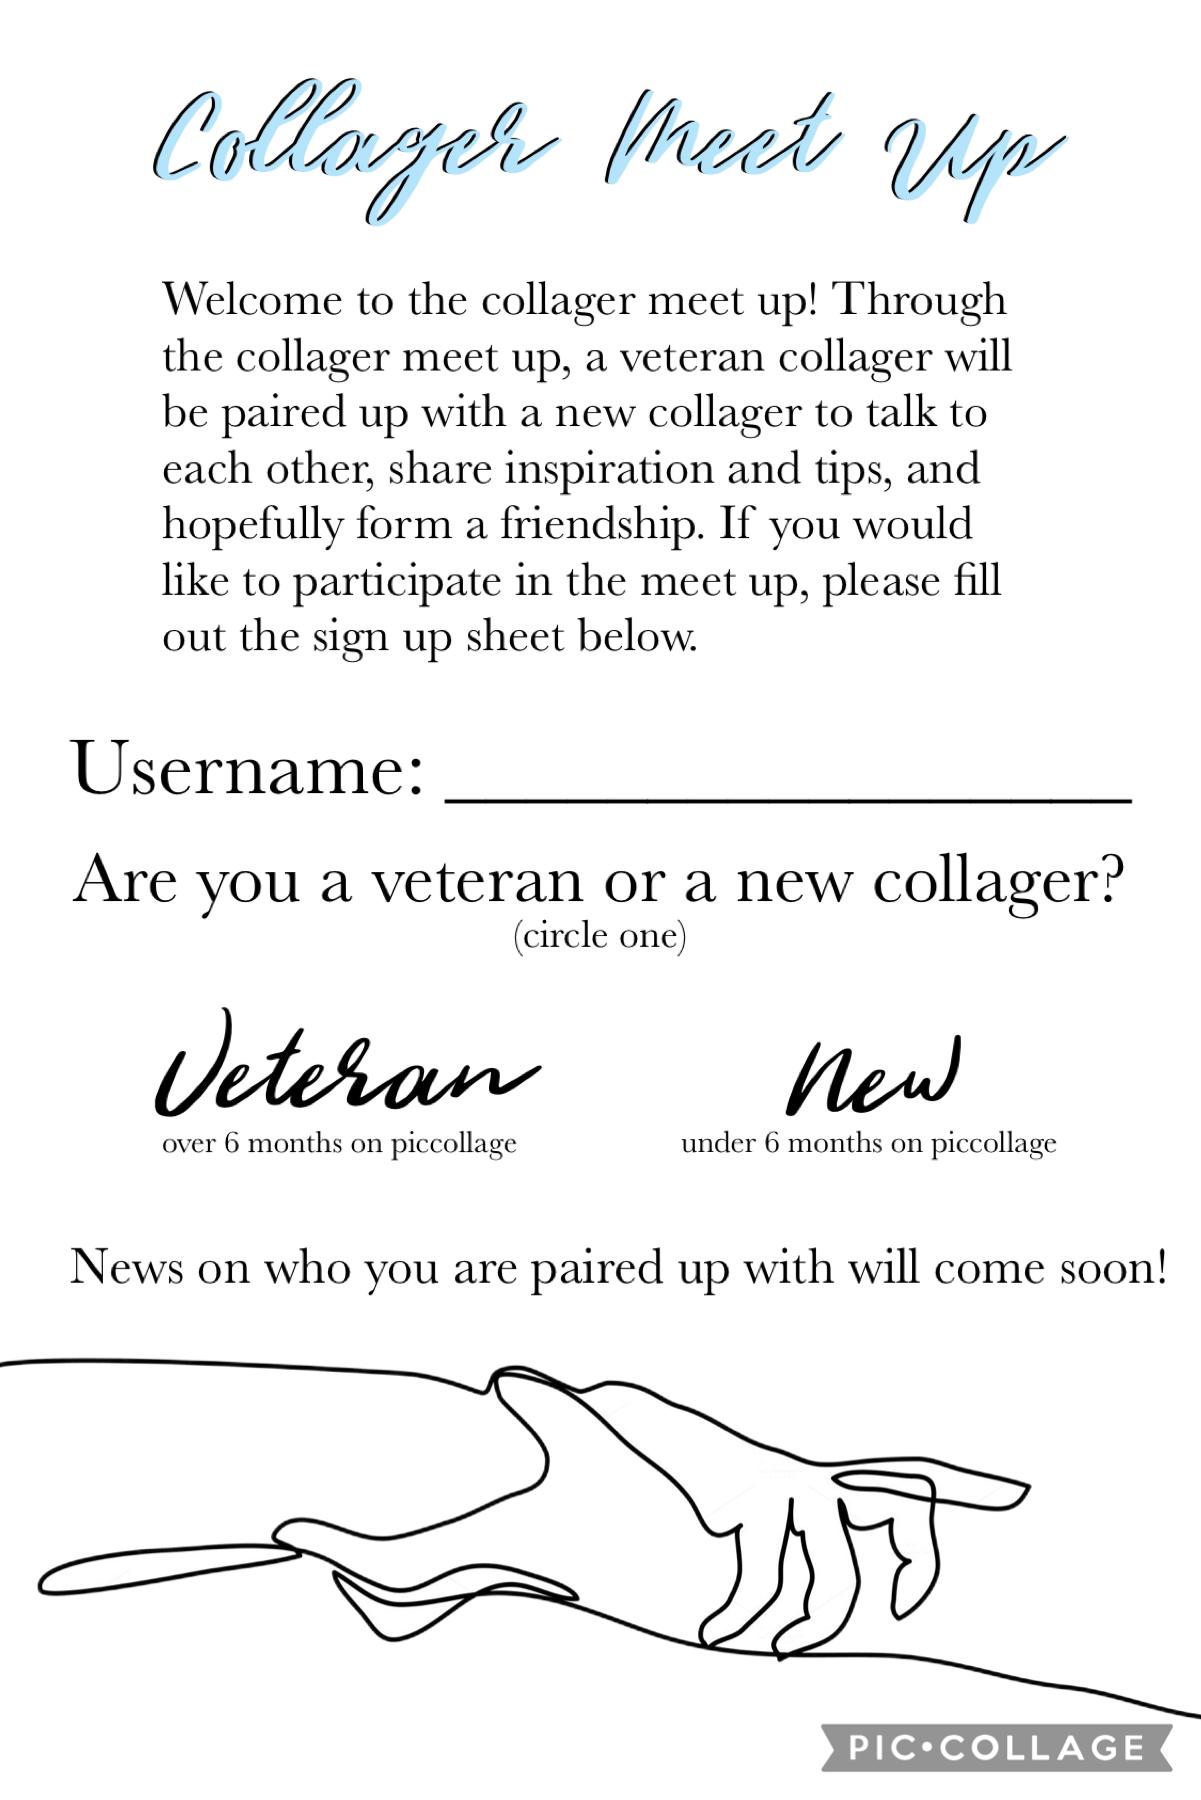 Collager Meet Up! It would be great if you could participate!